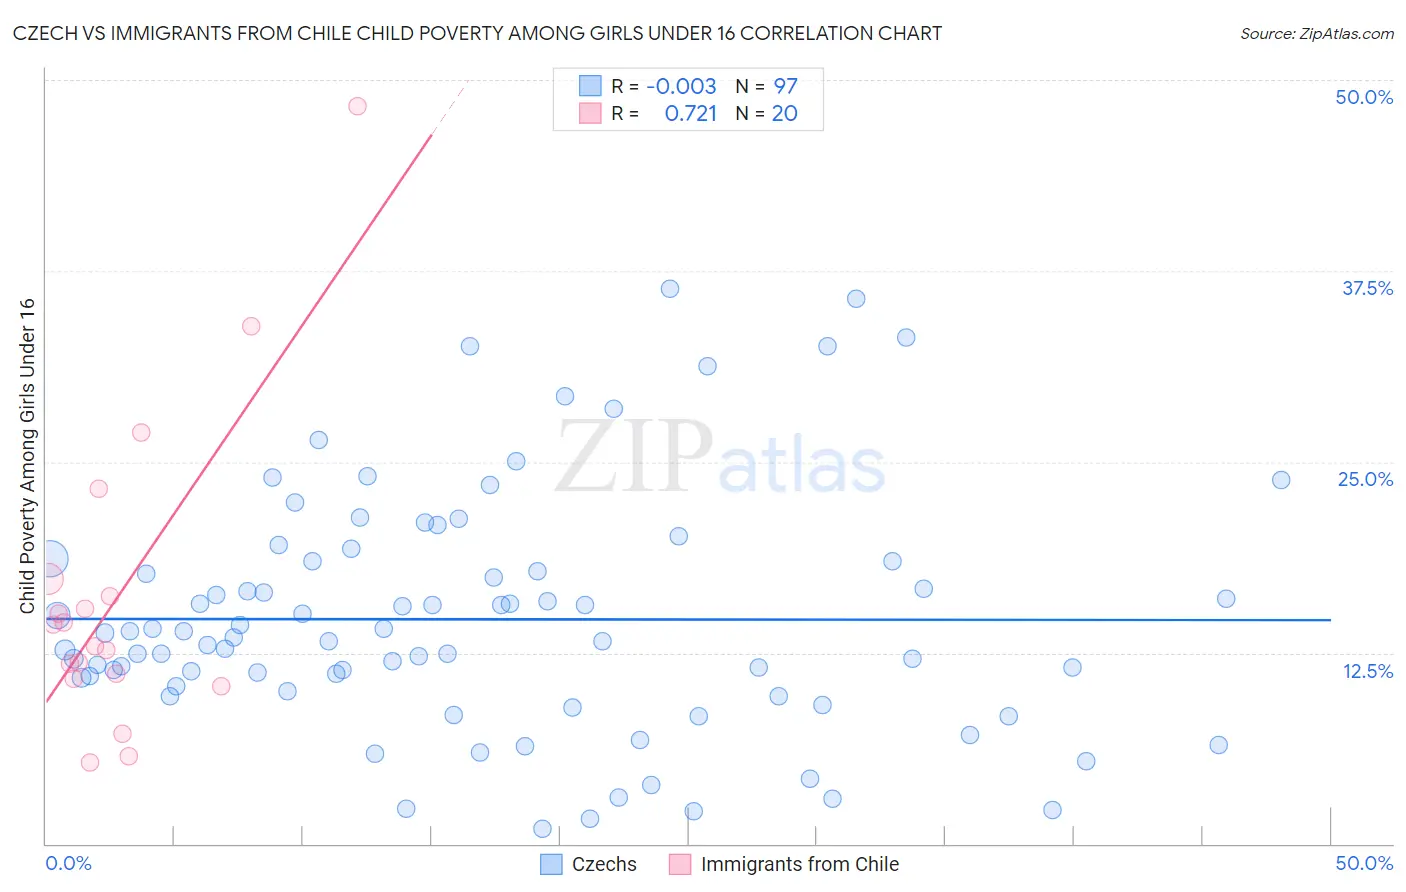 Czech vs Immigrants from Chile Child Poverty Among Girls Under 16